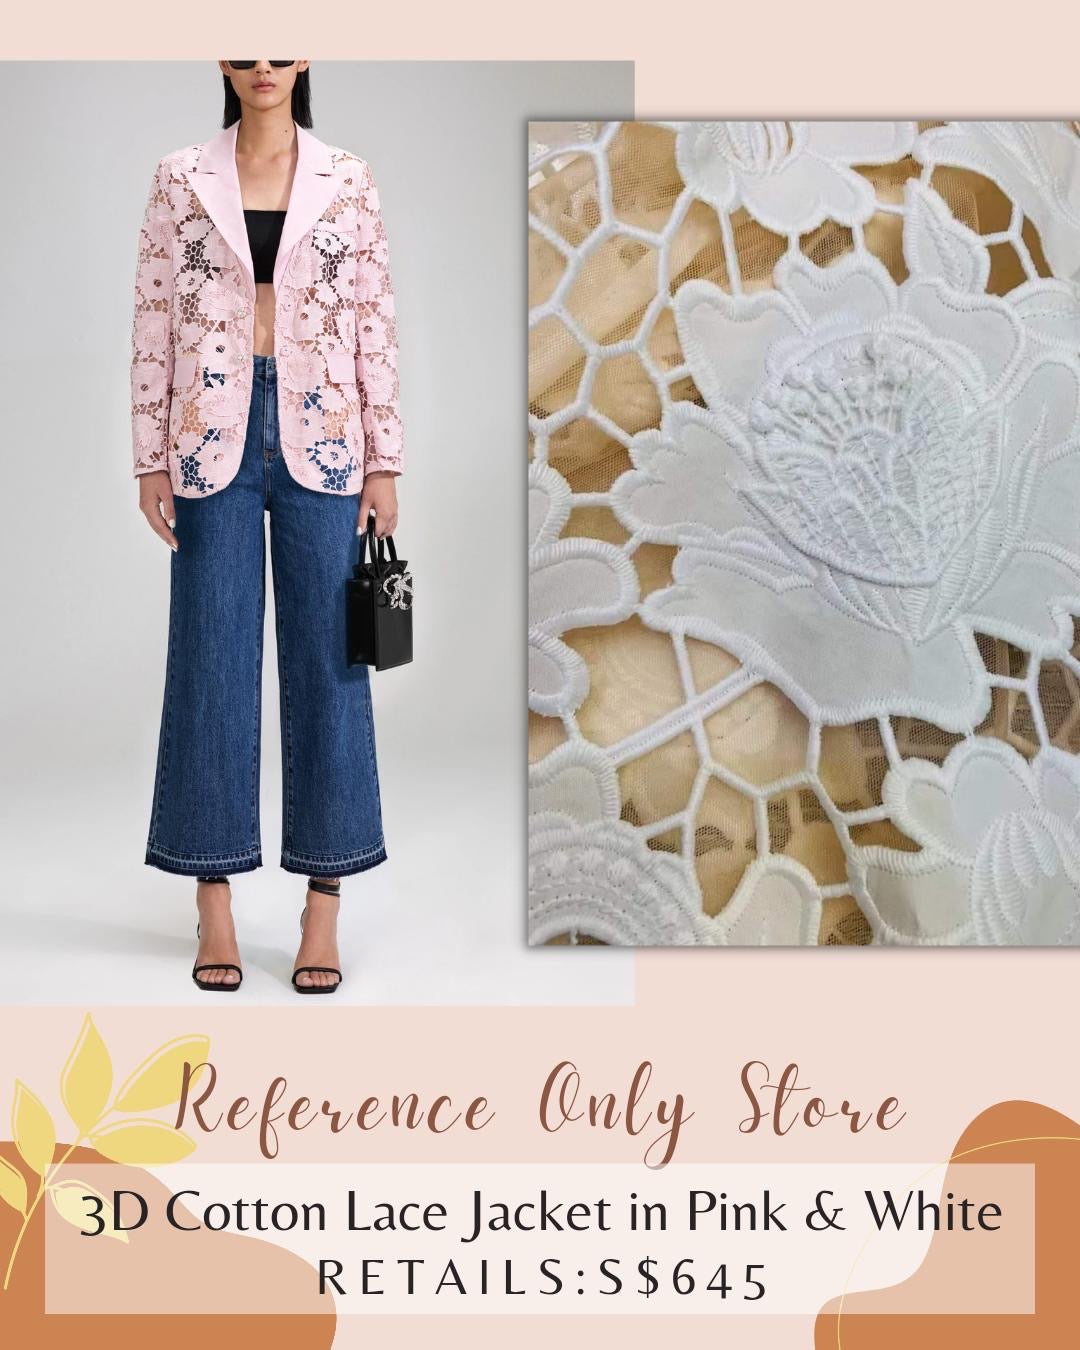 SP Cotton lace 3D Jacket Blazer in Pink and Ivory White